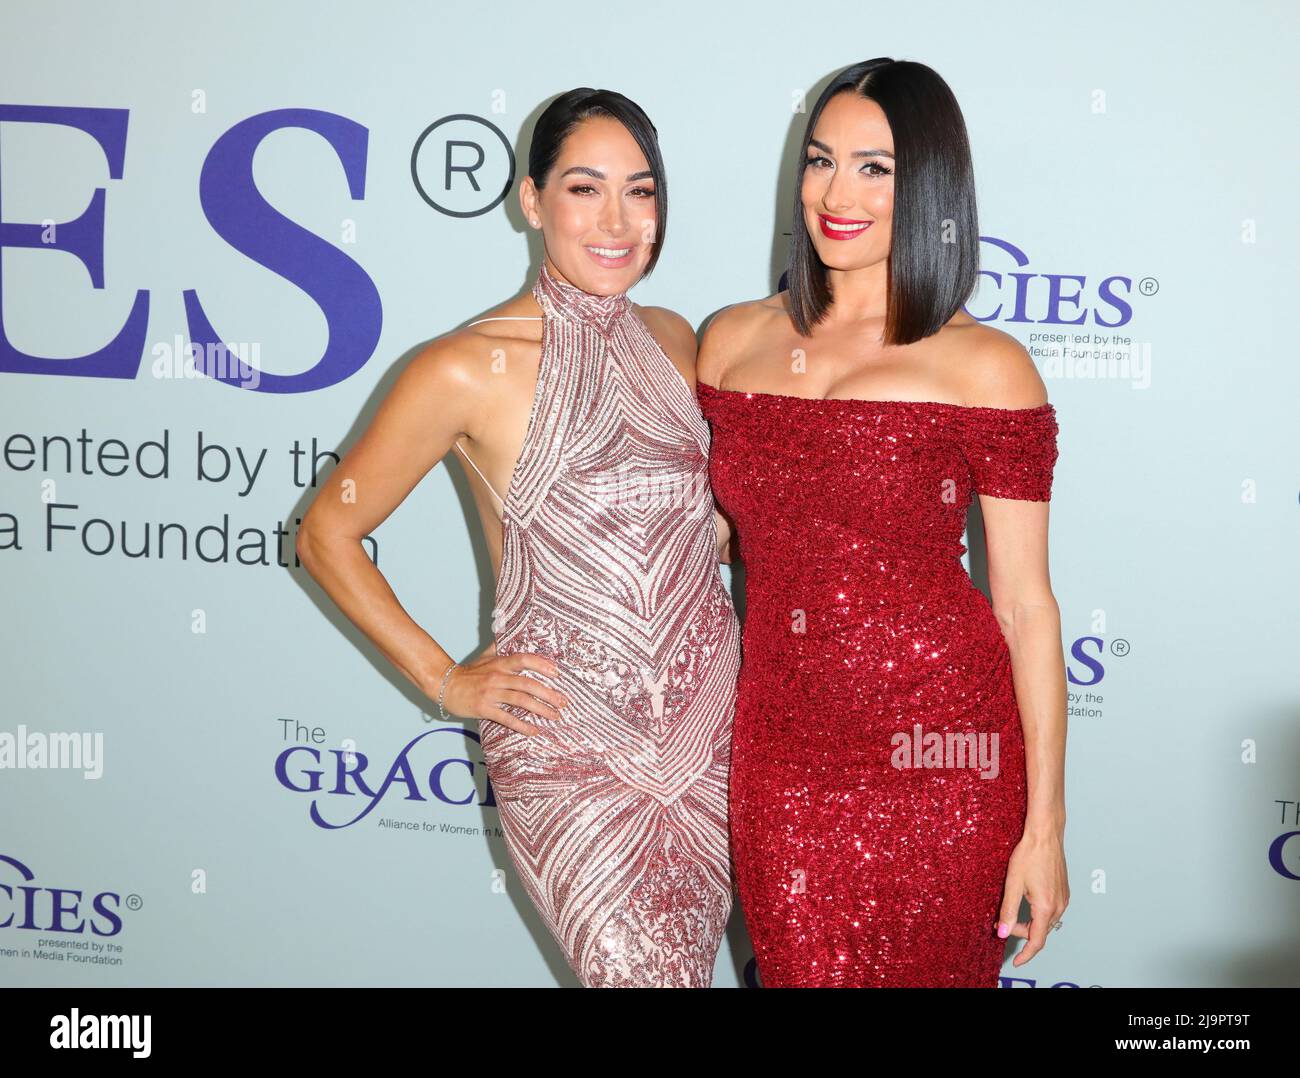 Nikki Bella and Brie Bella attend the Couture Council Award Luncheon  honoring Christian Louboutin on September 4, 2019 at David H Koch Theater  in Lincoln Center in New York, New York, USA.